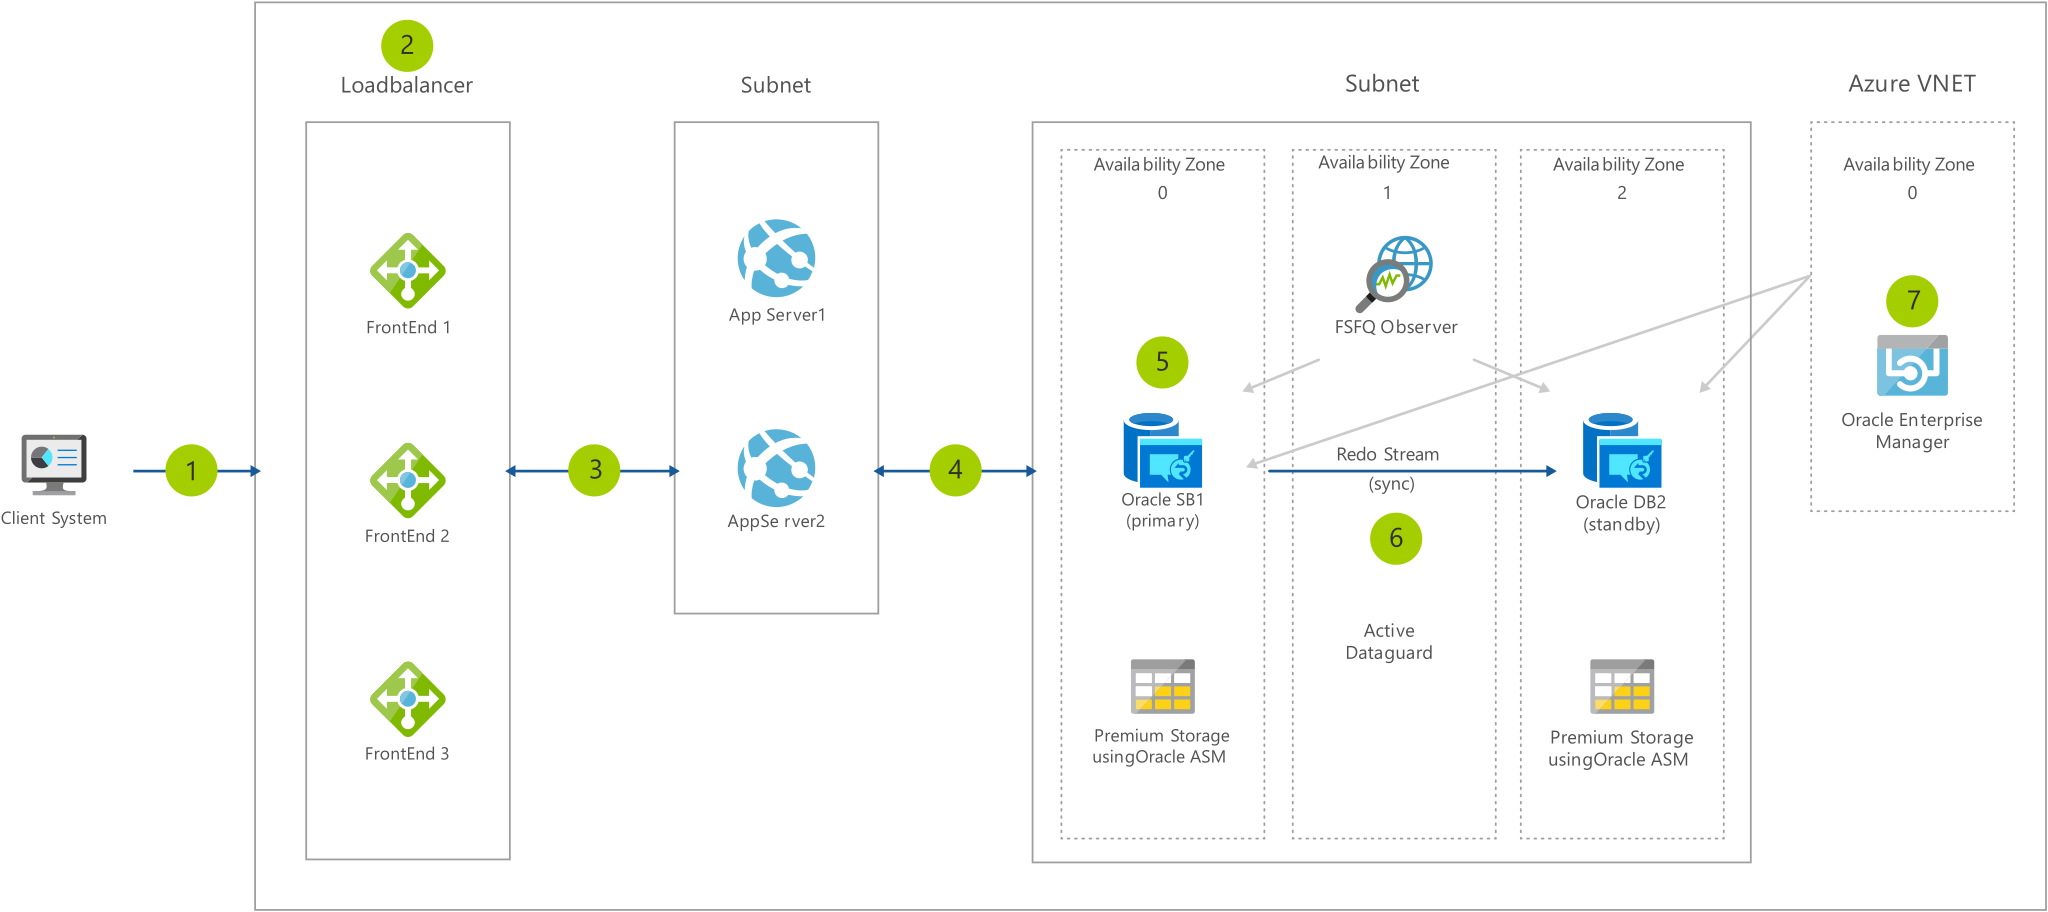 Architecture diagram shows from client through load balancer and subnets to Azure V NET.